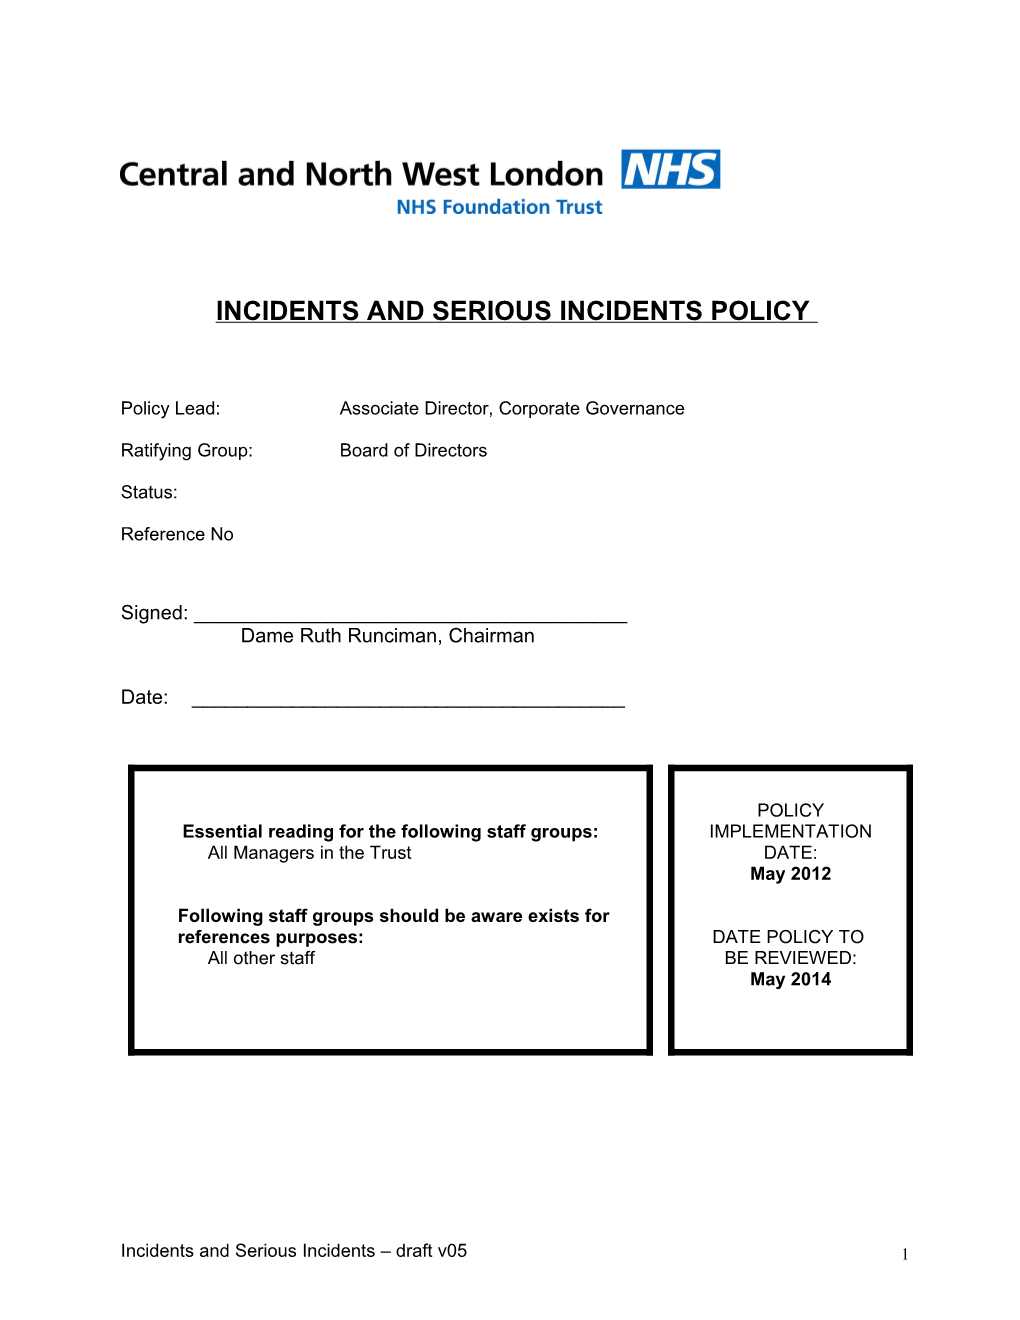 Incidents and Serious Incidents Policy